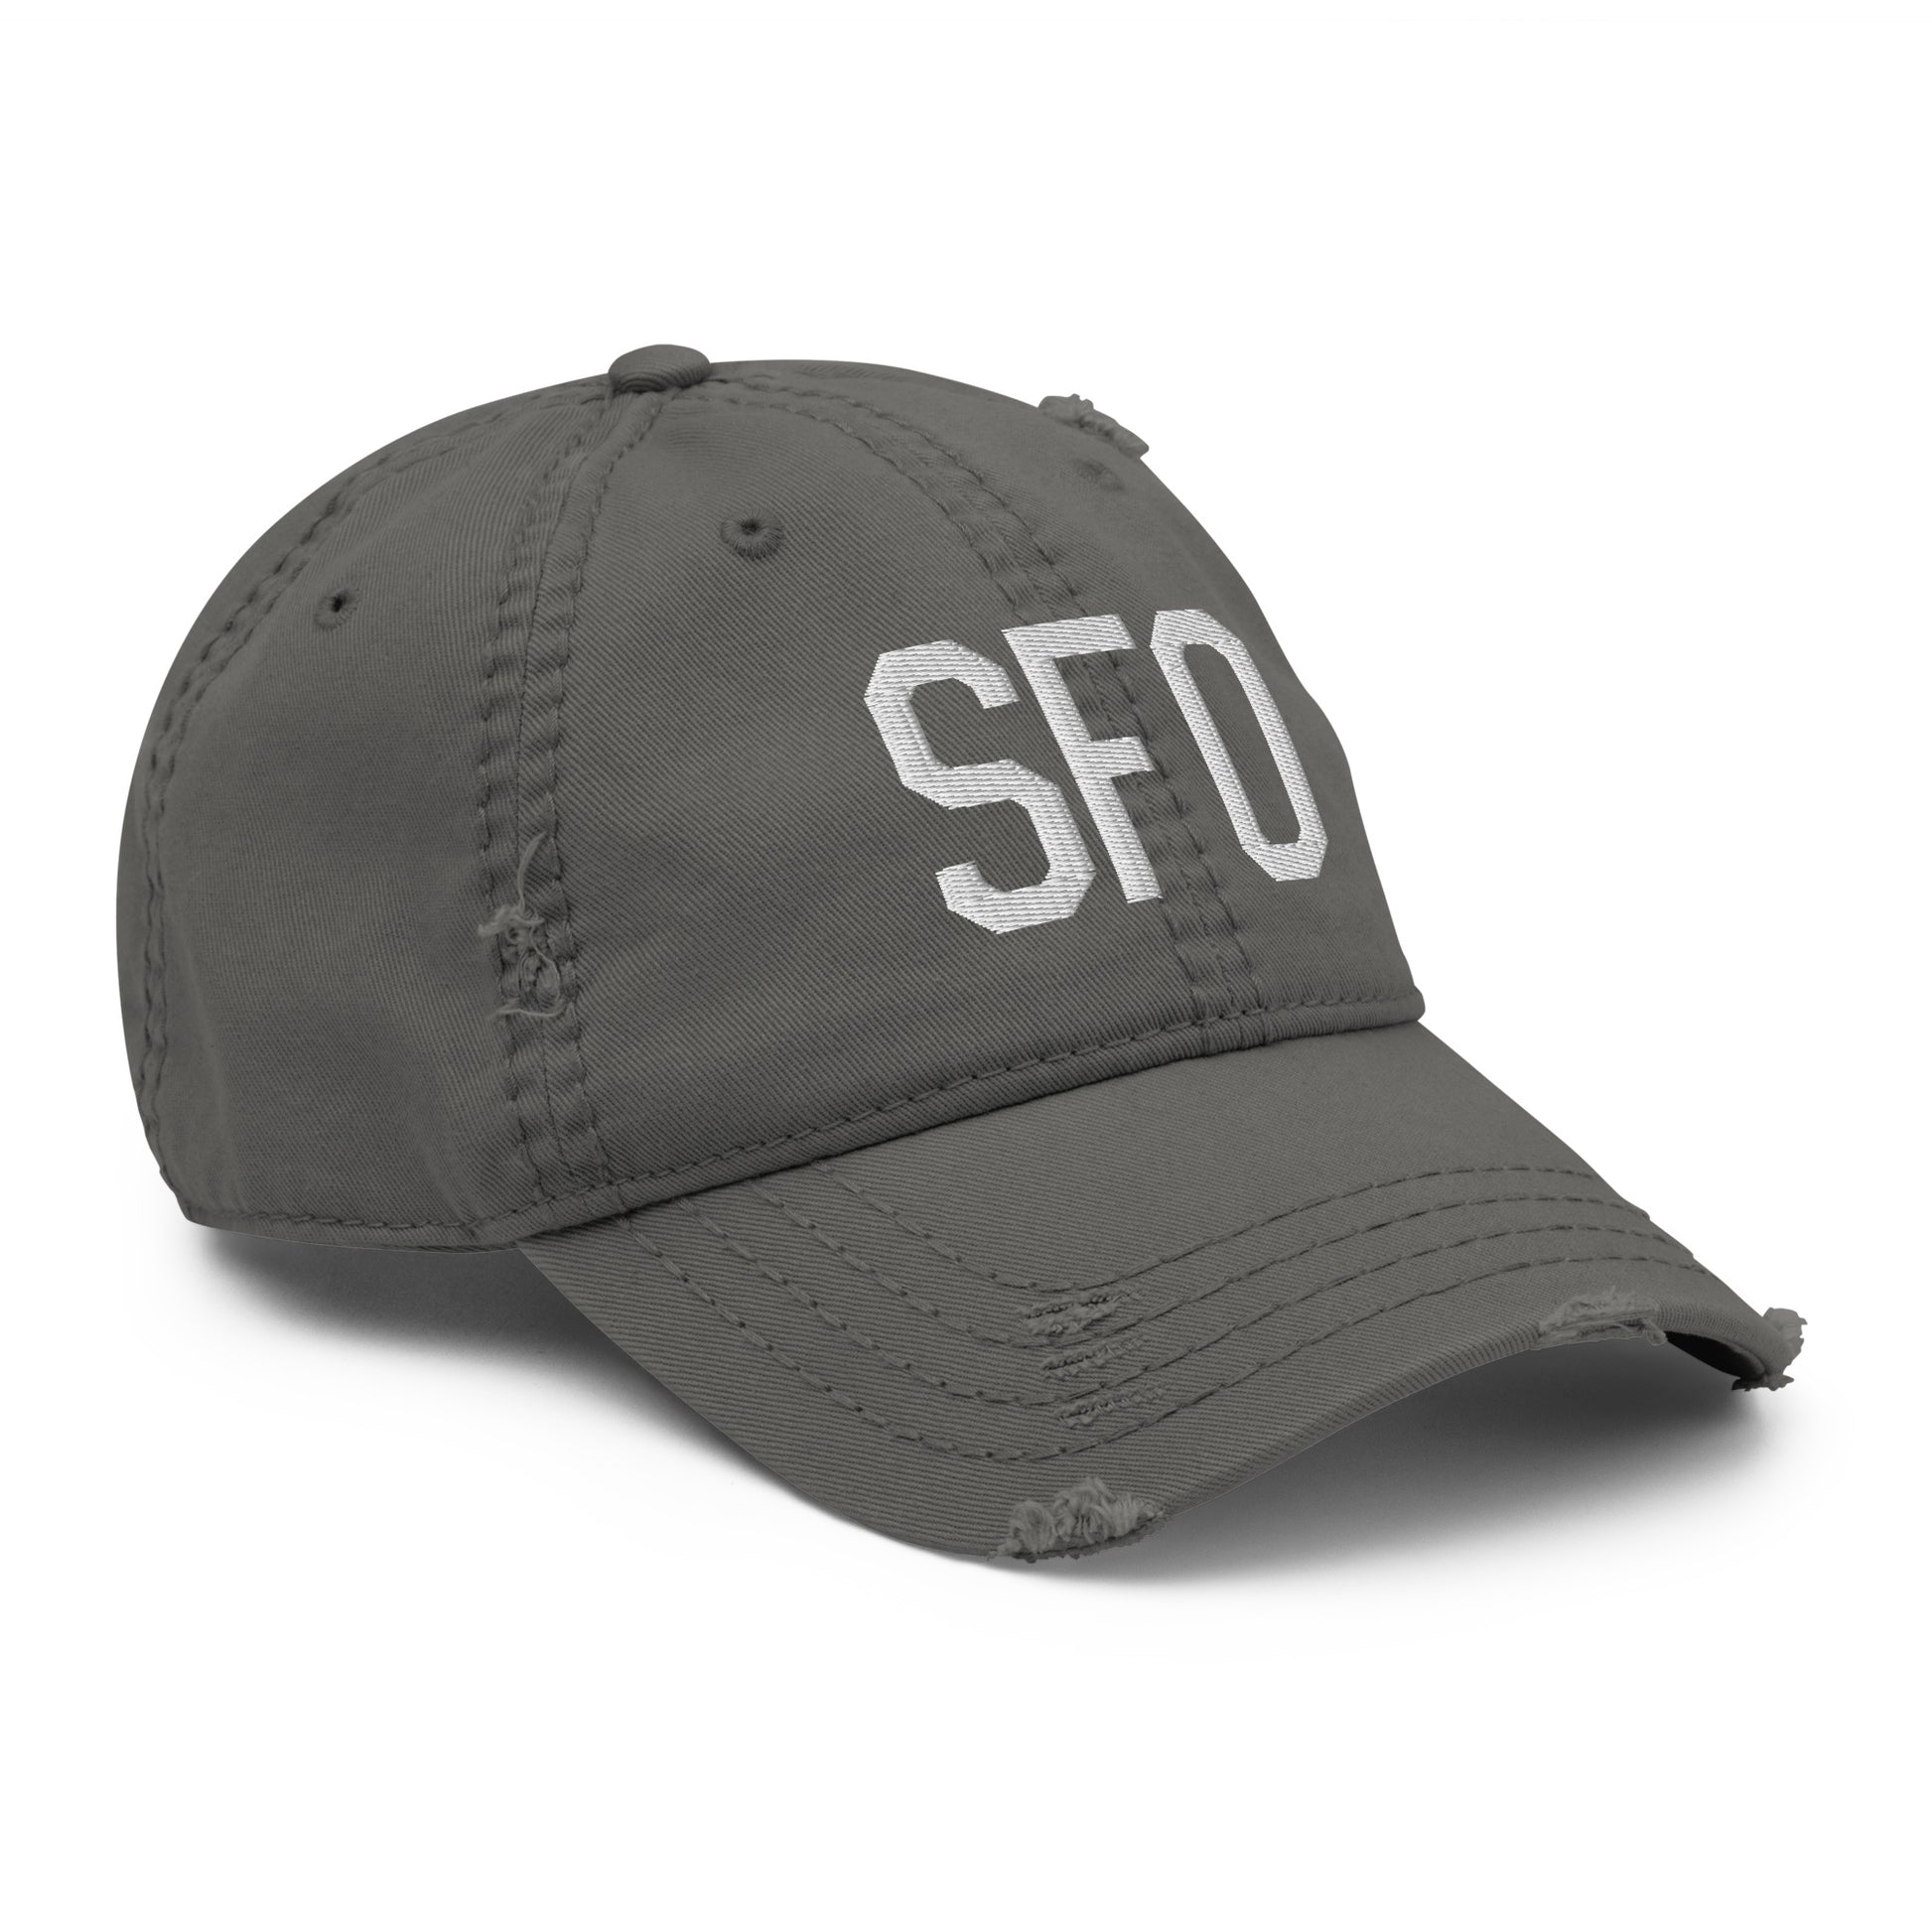 Airport Code Distressed Hat - White • SFO San Francisco • YHM Designs - Image 17